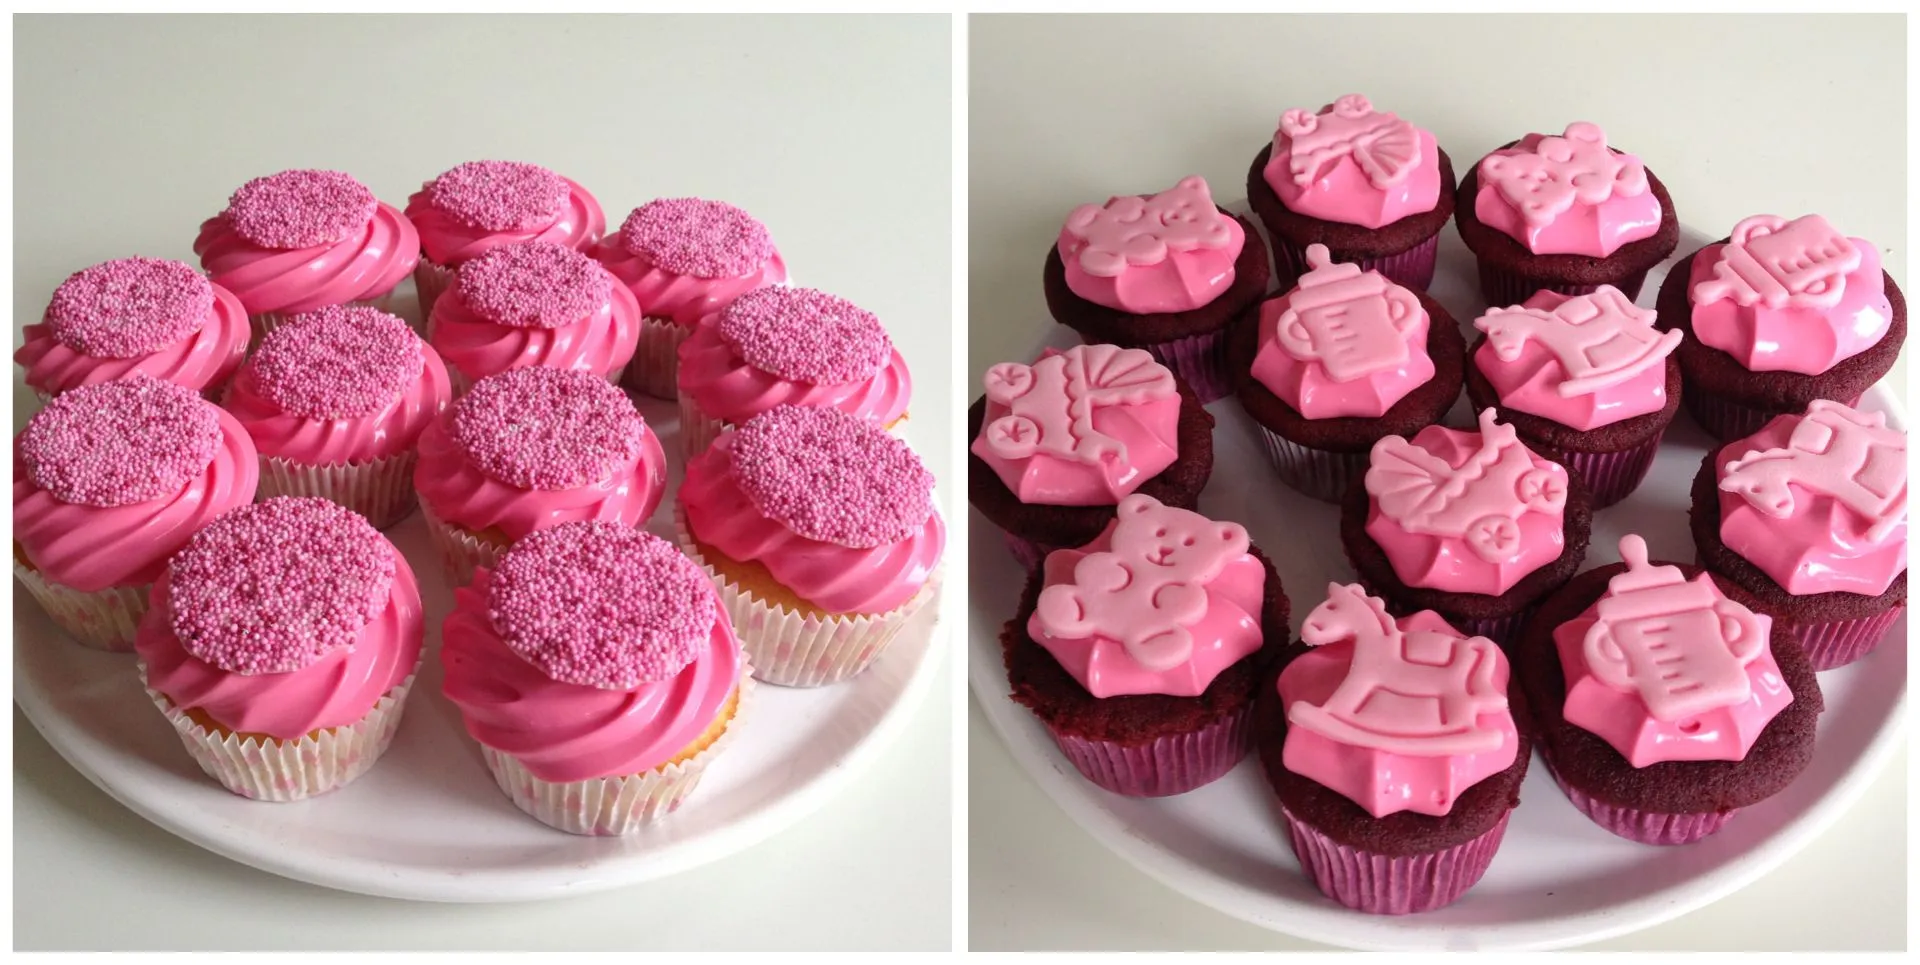 It's a girl! – Baby shower cupcakes | thirstforfood